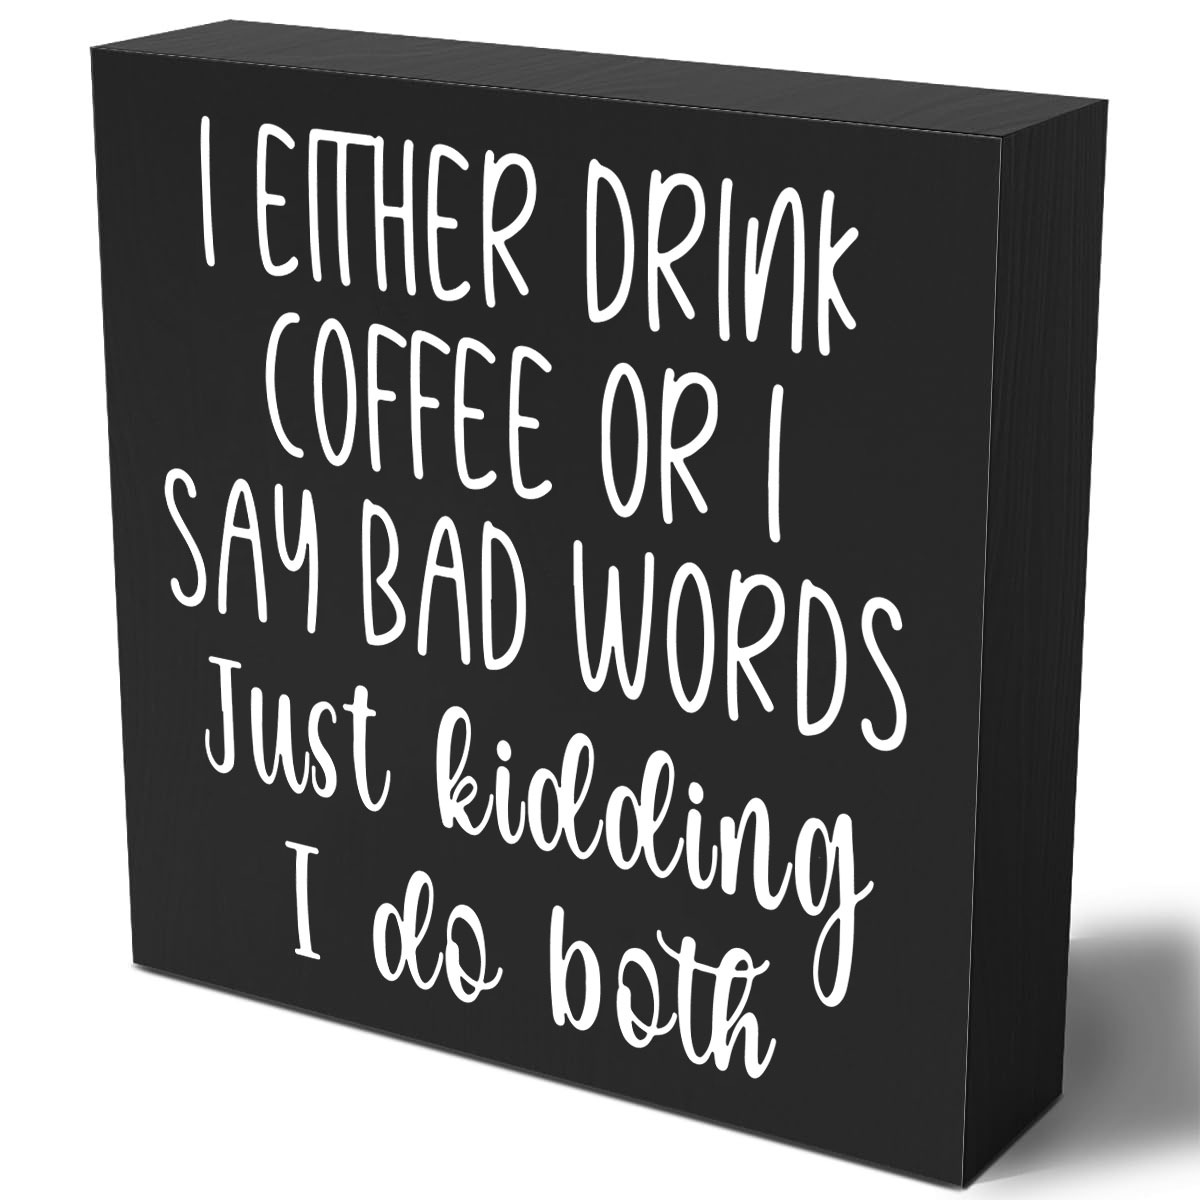 

1pc, Funny Coffee Sign, Coffee Bar Accessories Decor, I Either Drink Coffee Or I Say Bad Words Wood Box Sign Desk Decor, Wooden Box Block Sign Decorations For Coffee Station Shop Coner Wall Tabletop